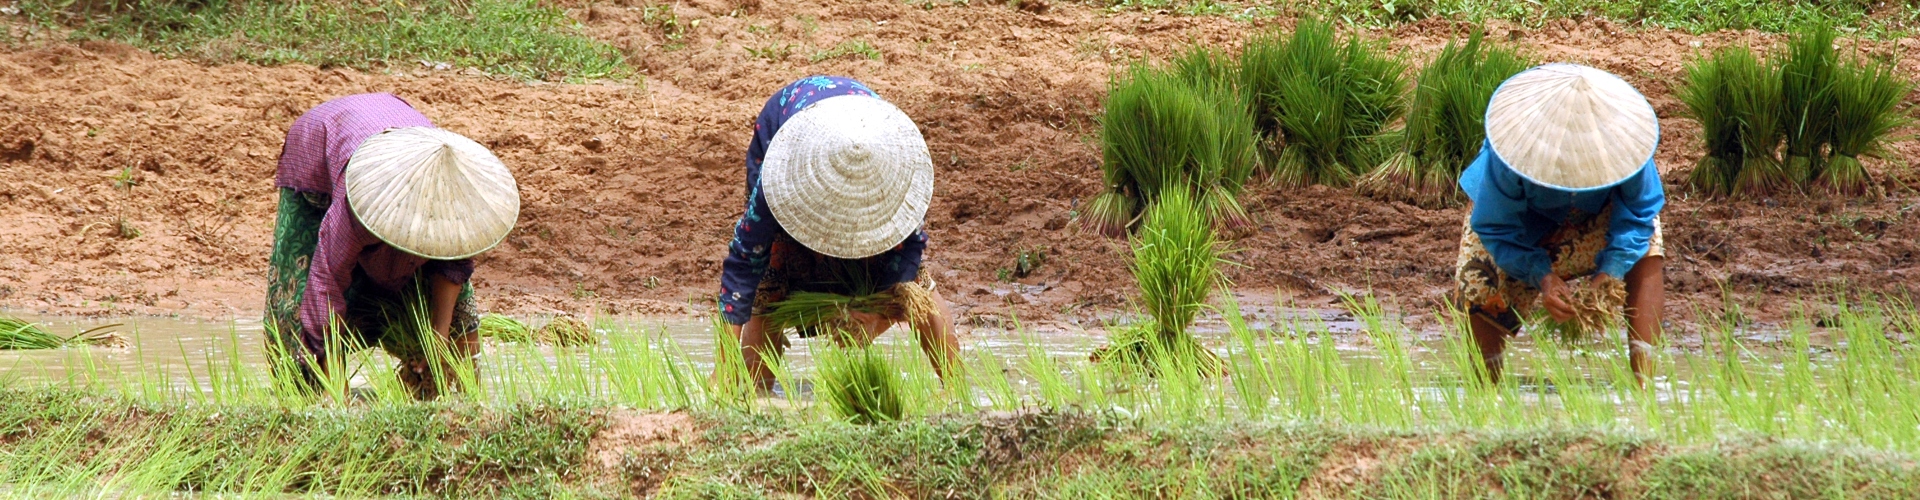 Three woman working in a rice field with hats on in Cambodia 